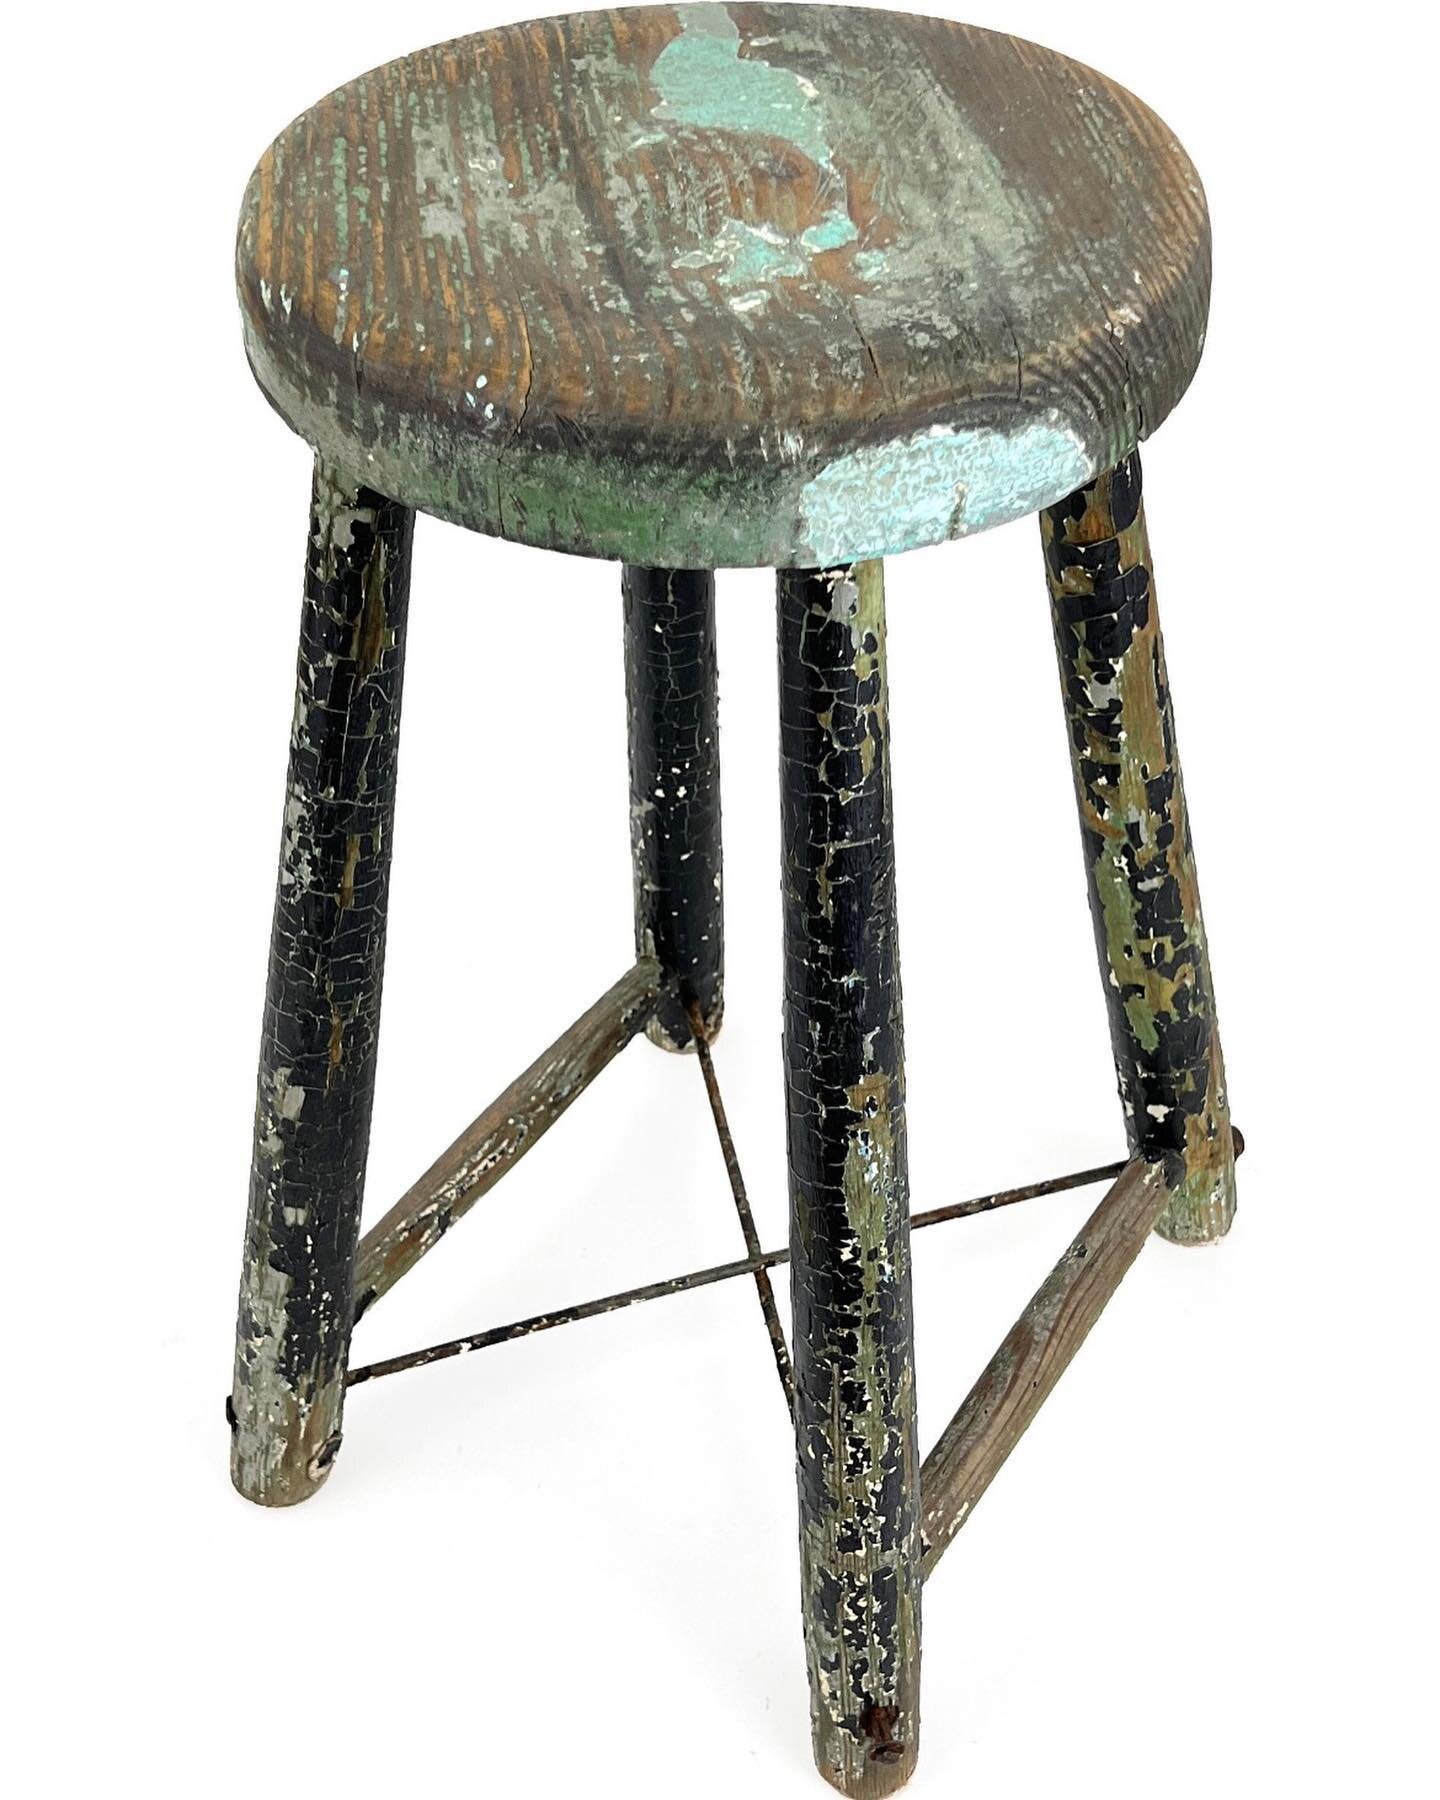 Beautiful distressed stool from the 1930s for sale. DM me for more info! 

#antiques #vintage #vintagestyle #interiordesign #inspo #inspohome #homedecor #home #antiquewithmodern #vougemagazine #interiordecor #mcm